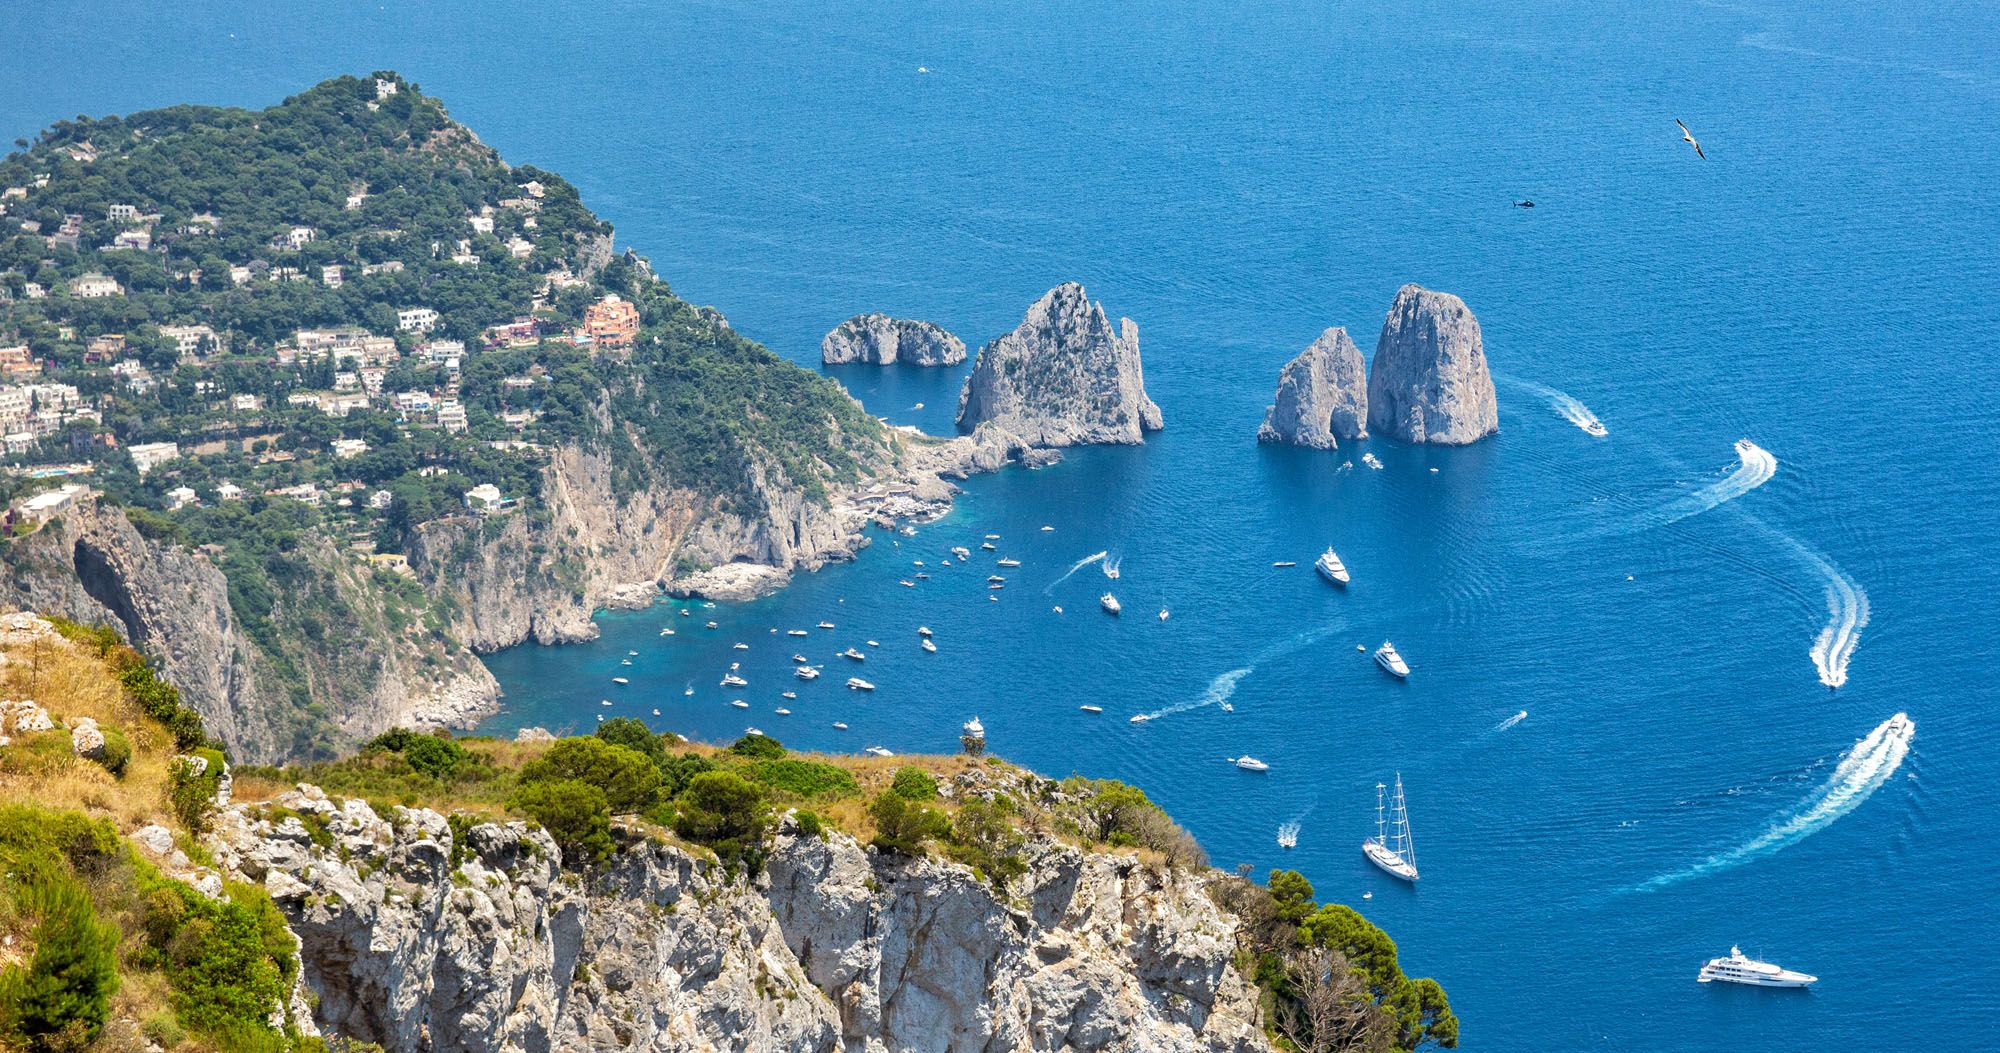 Capri day trip: one of the most beautiful places